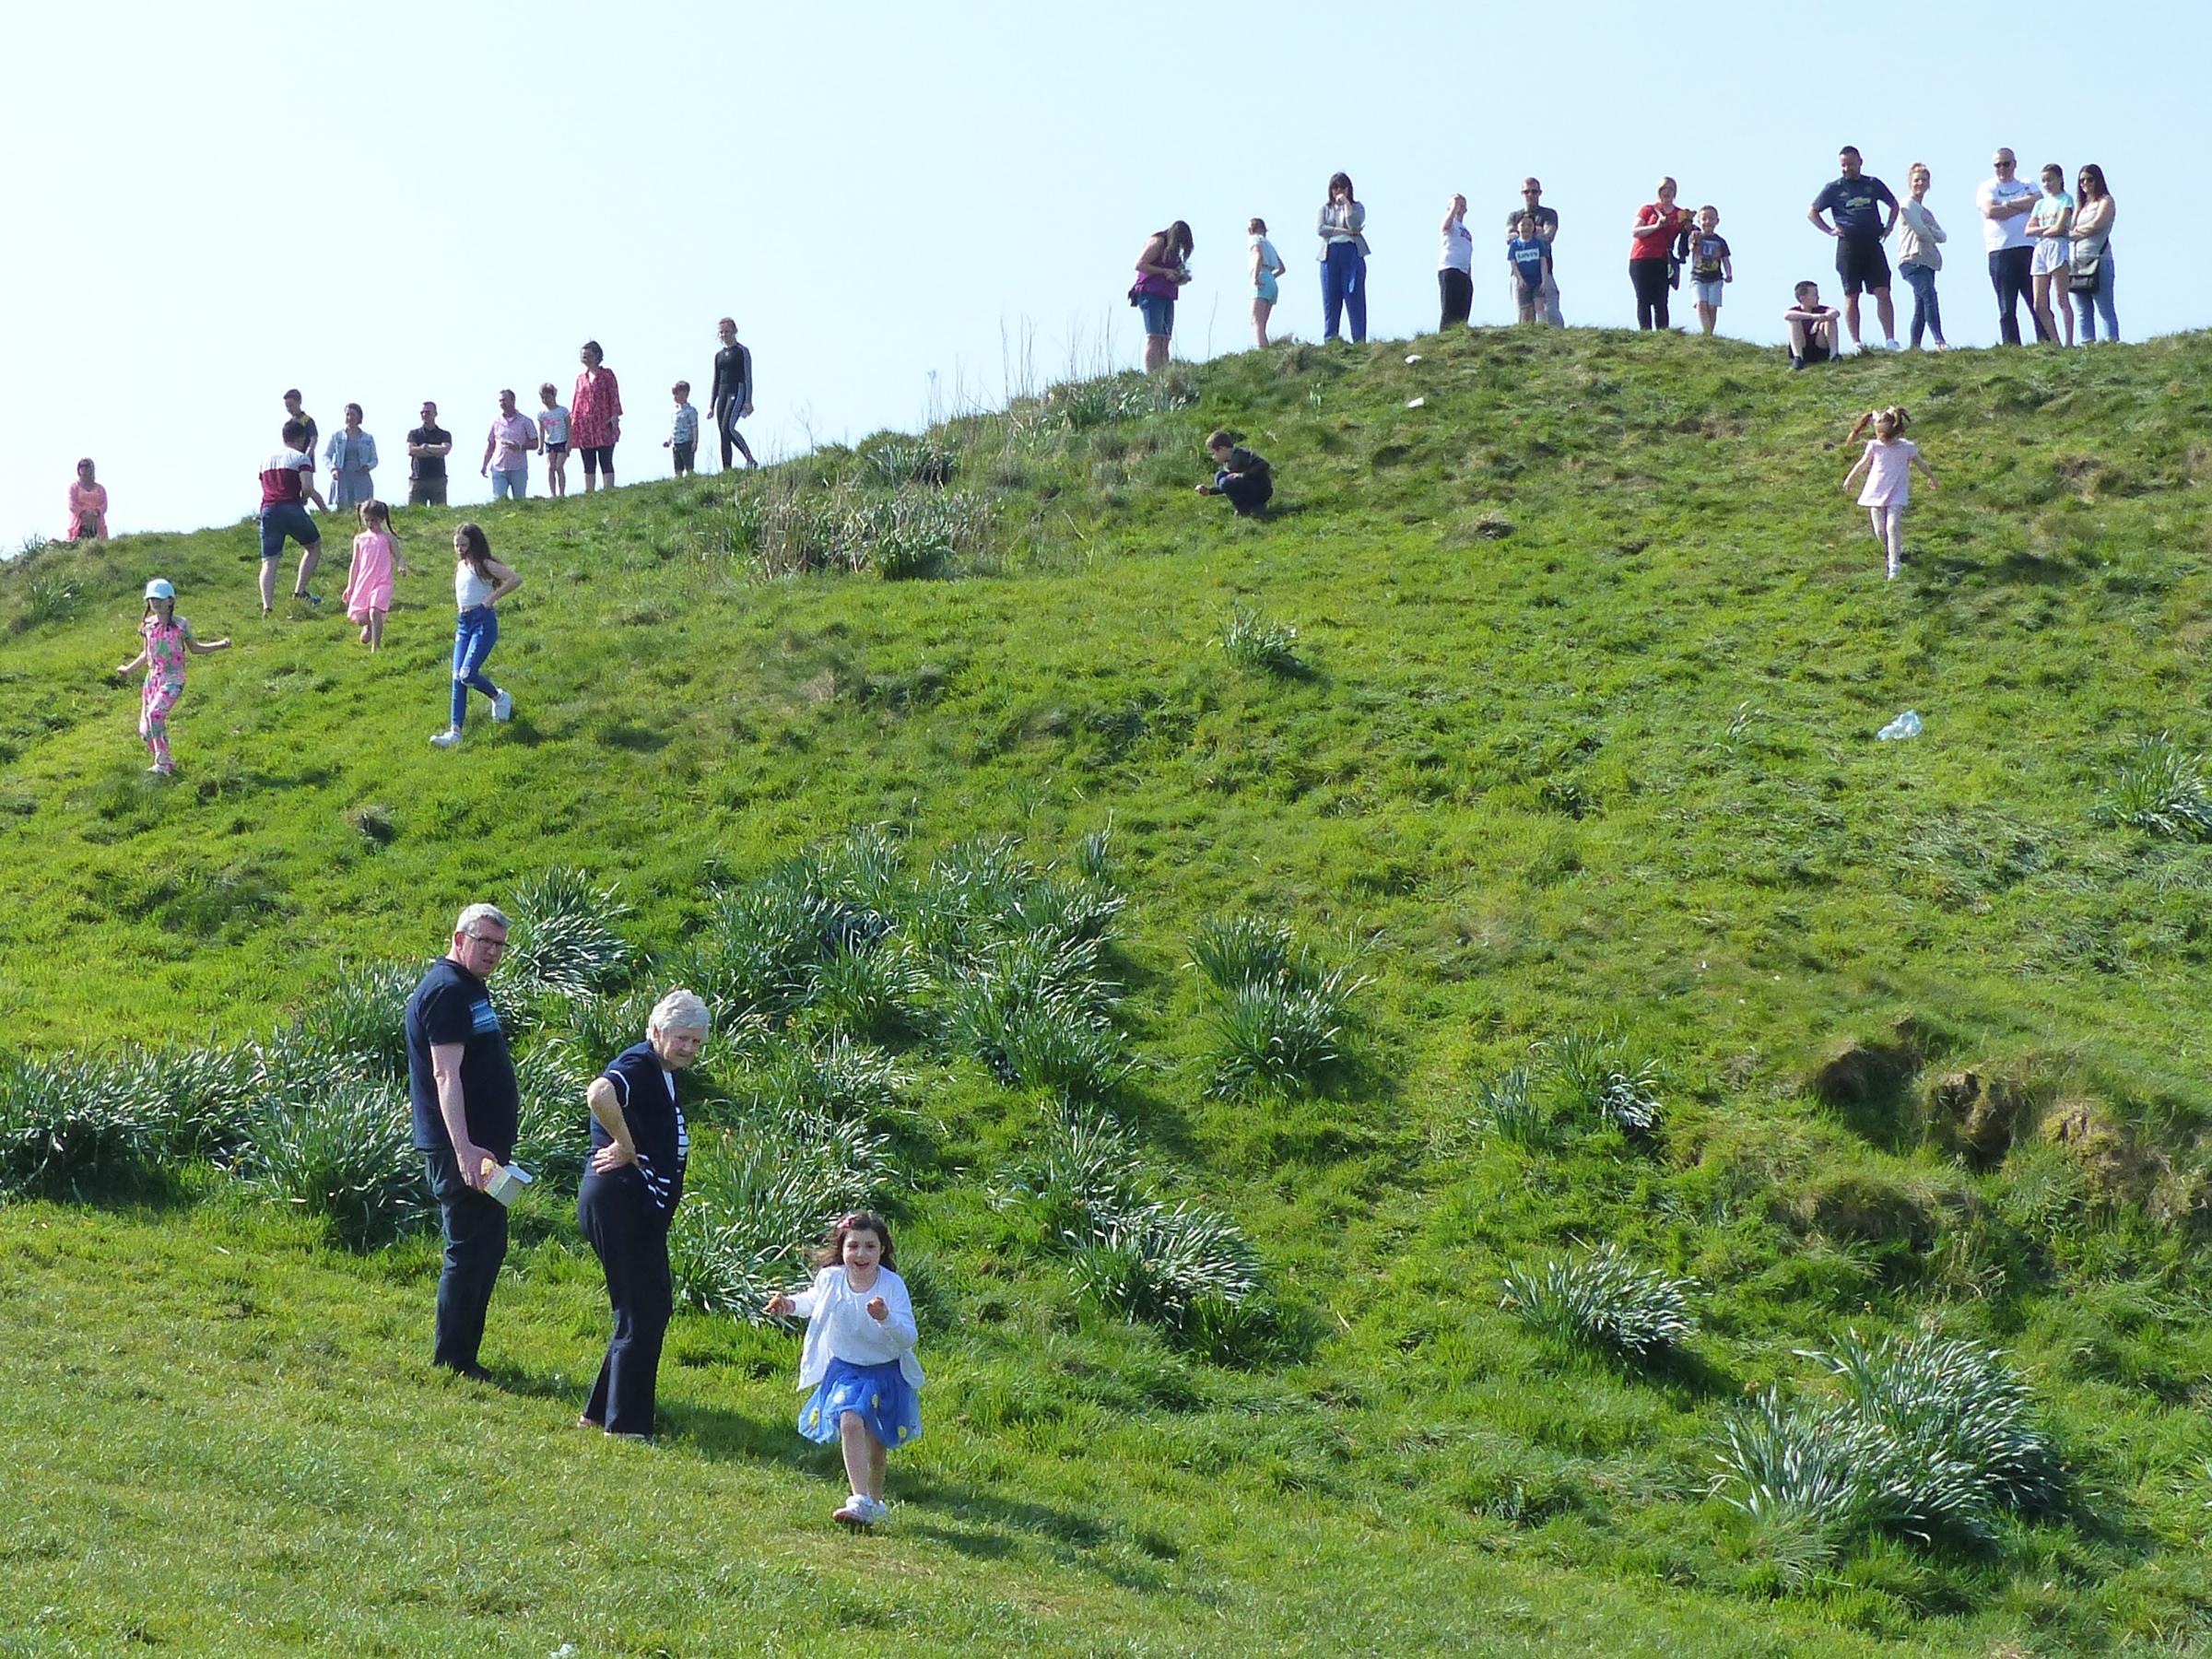 Easter Egg rolling at Ardrossan's Castle Hill celebrated by hundreds